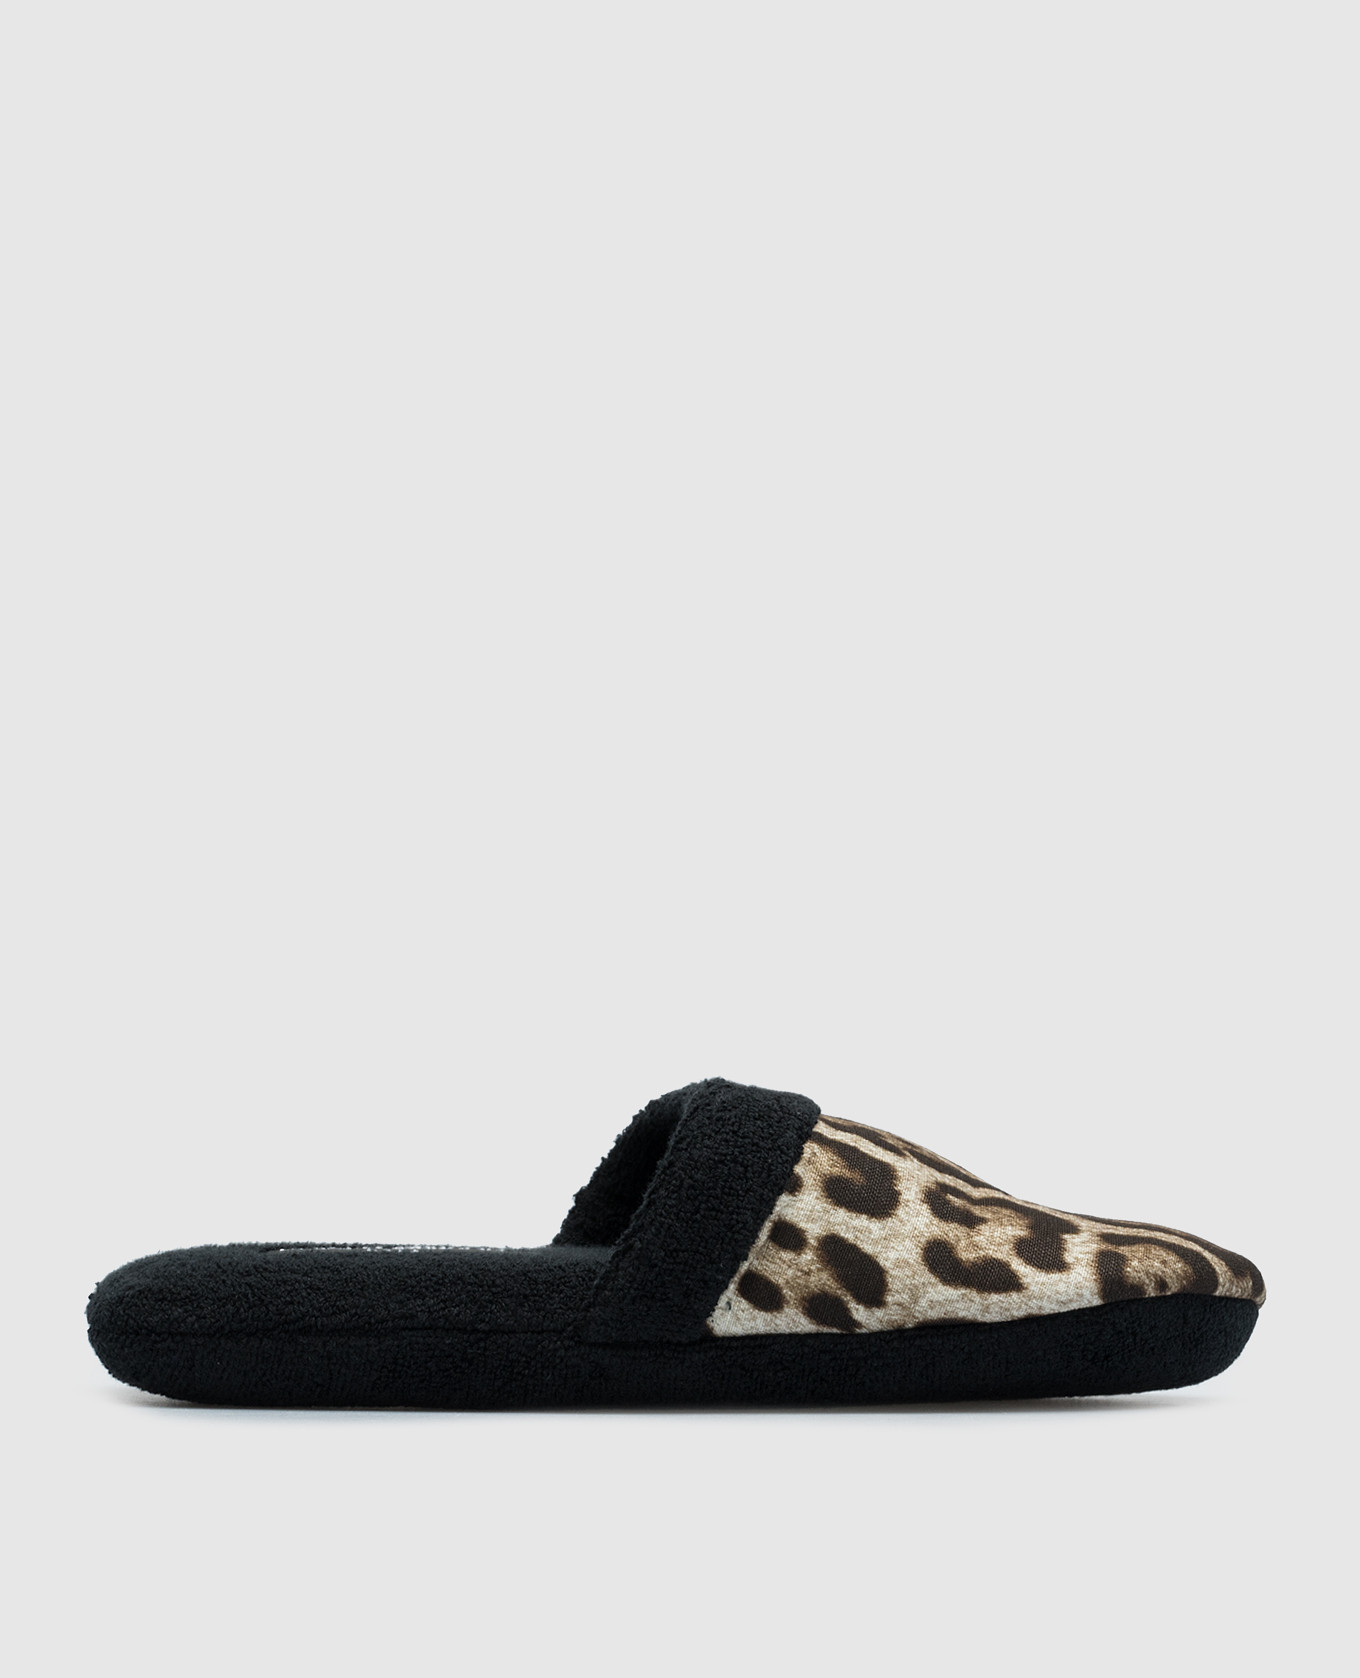 Black slippers in an animalistic print